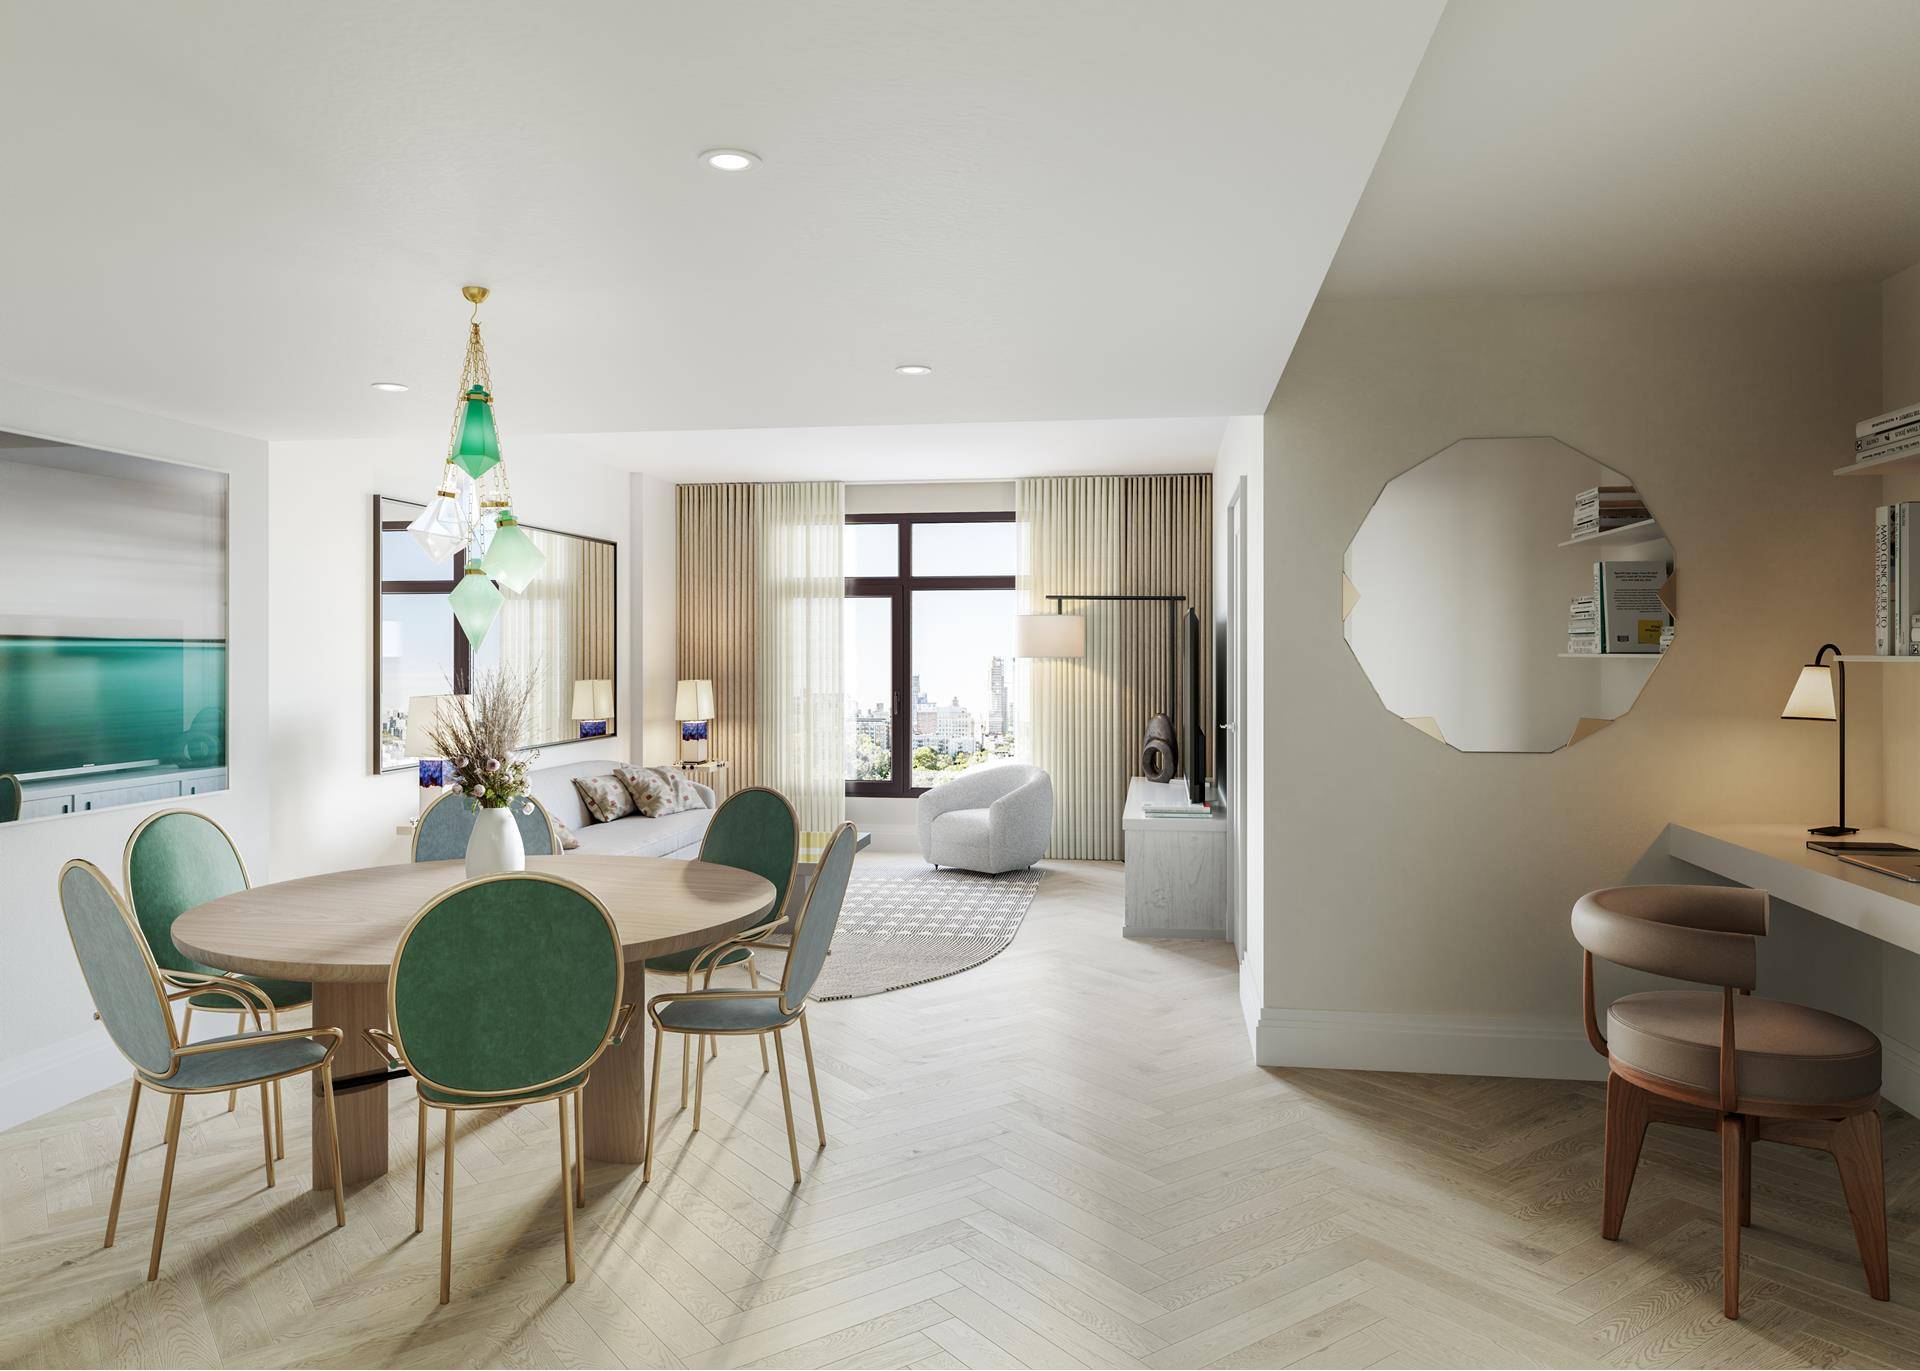 Sales Gallery Now Open By Appointment Introducing residence 4D at 300 West, an east facing studio offering an open concept living area that boasts custom White Oak herringbone flooring, central ...